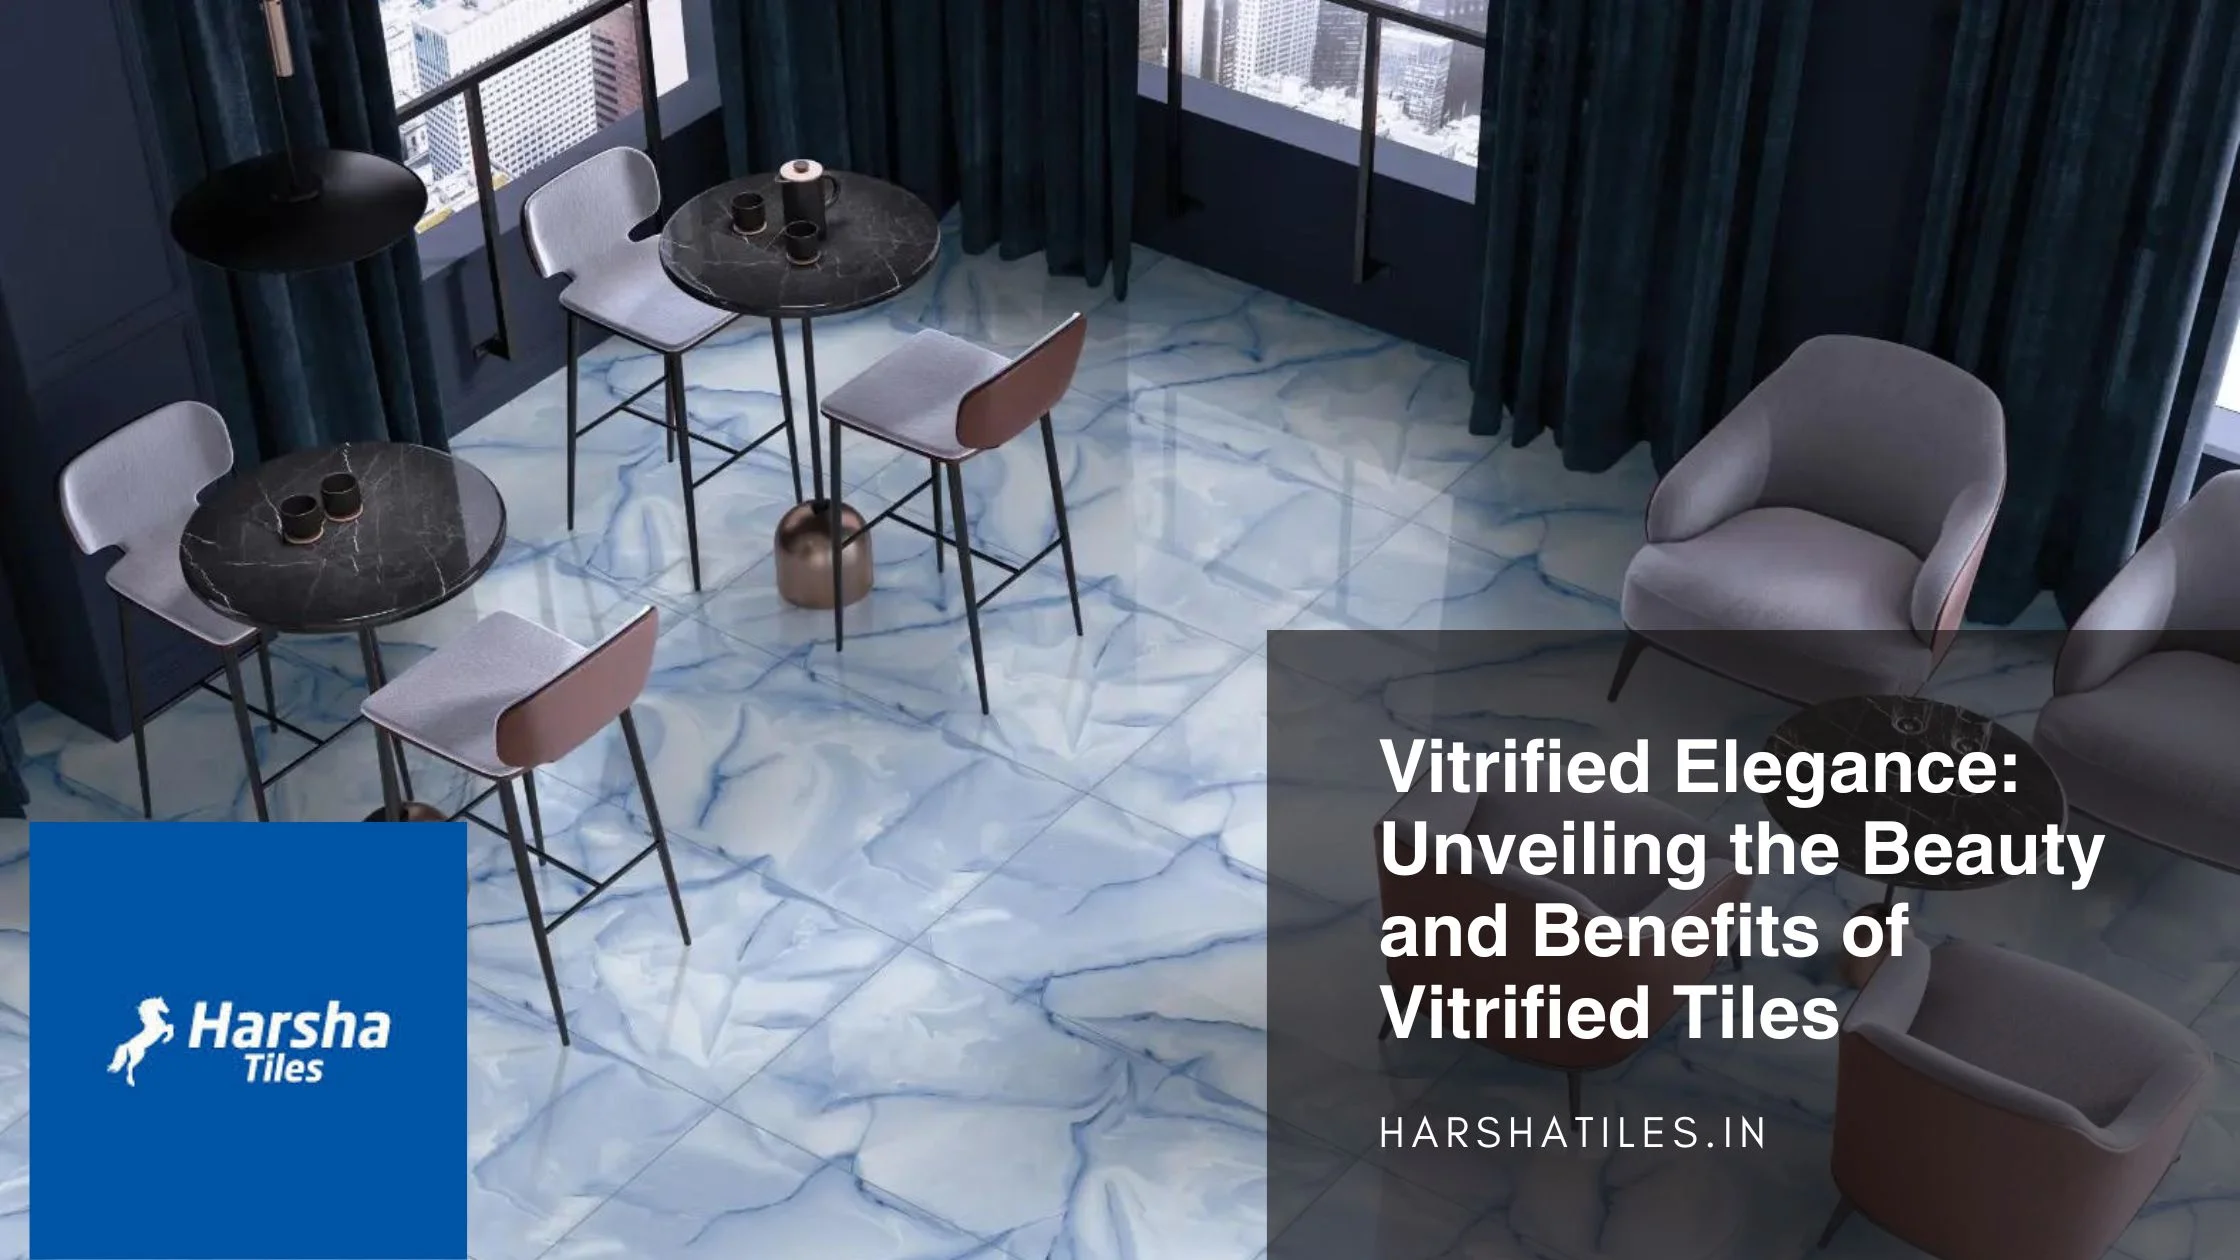 Vitrified Elegance: Unveiling the Beauty and Benefits of Vitrified Tiles